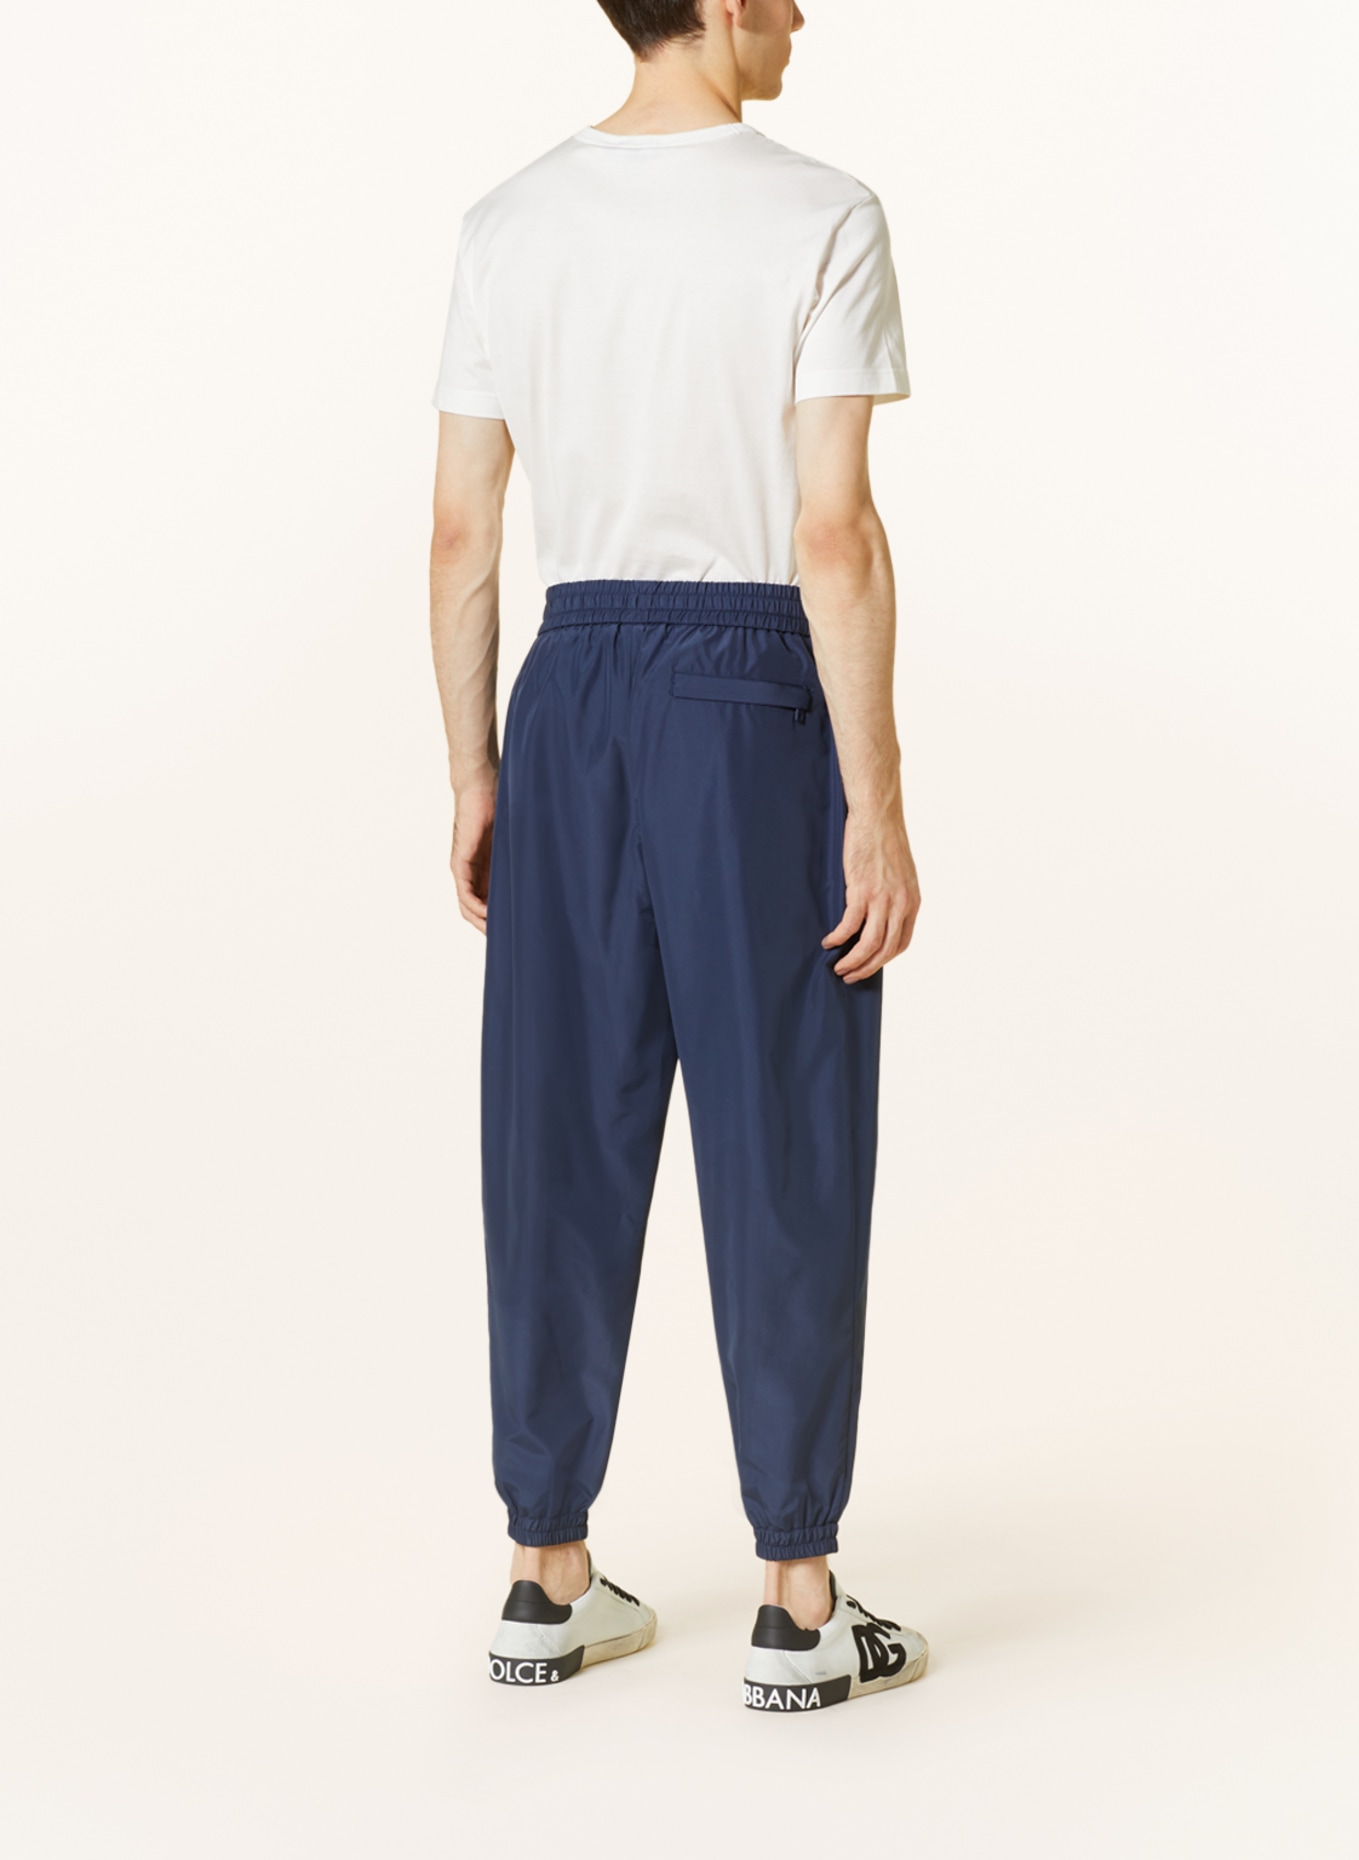 DOLCE & GABBANA Pants in jogger style, Color: DARK BLUE (Image 3)